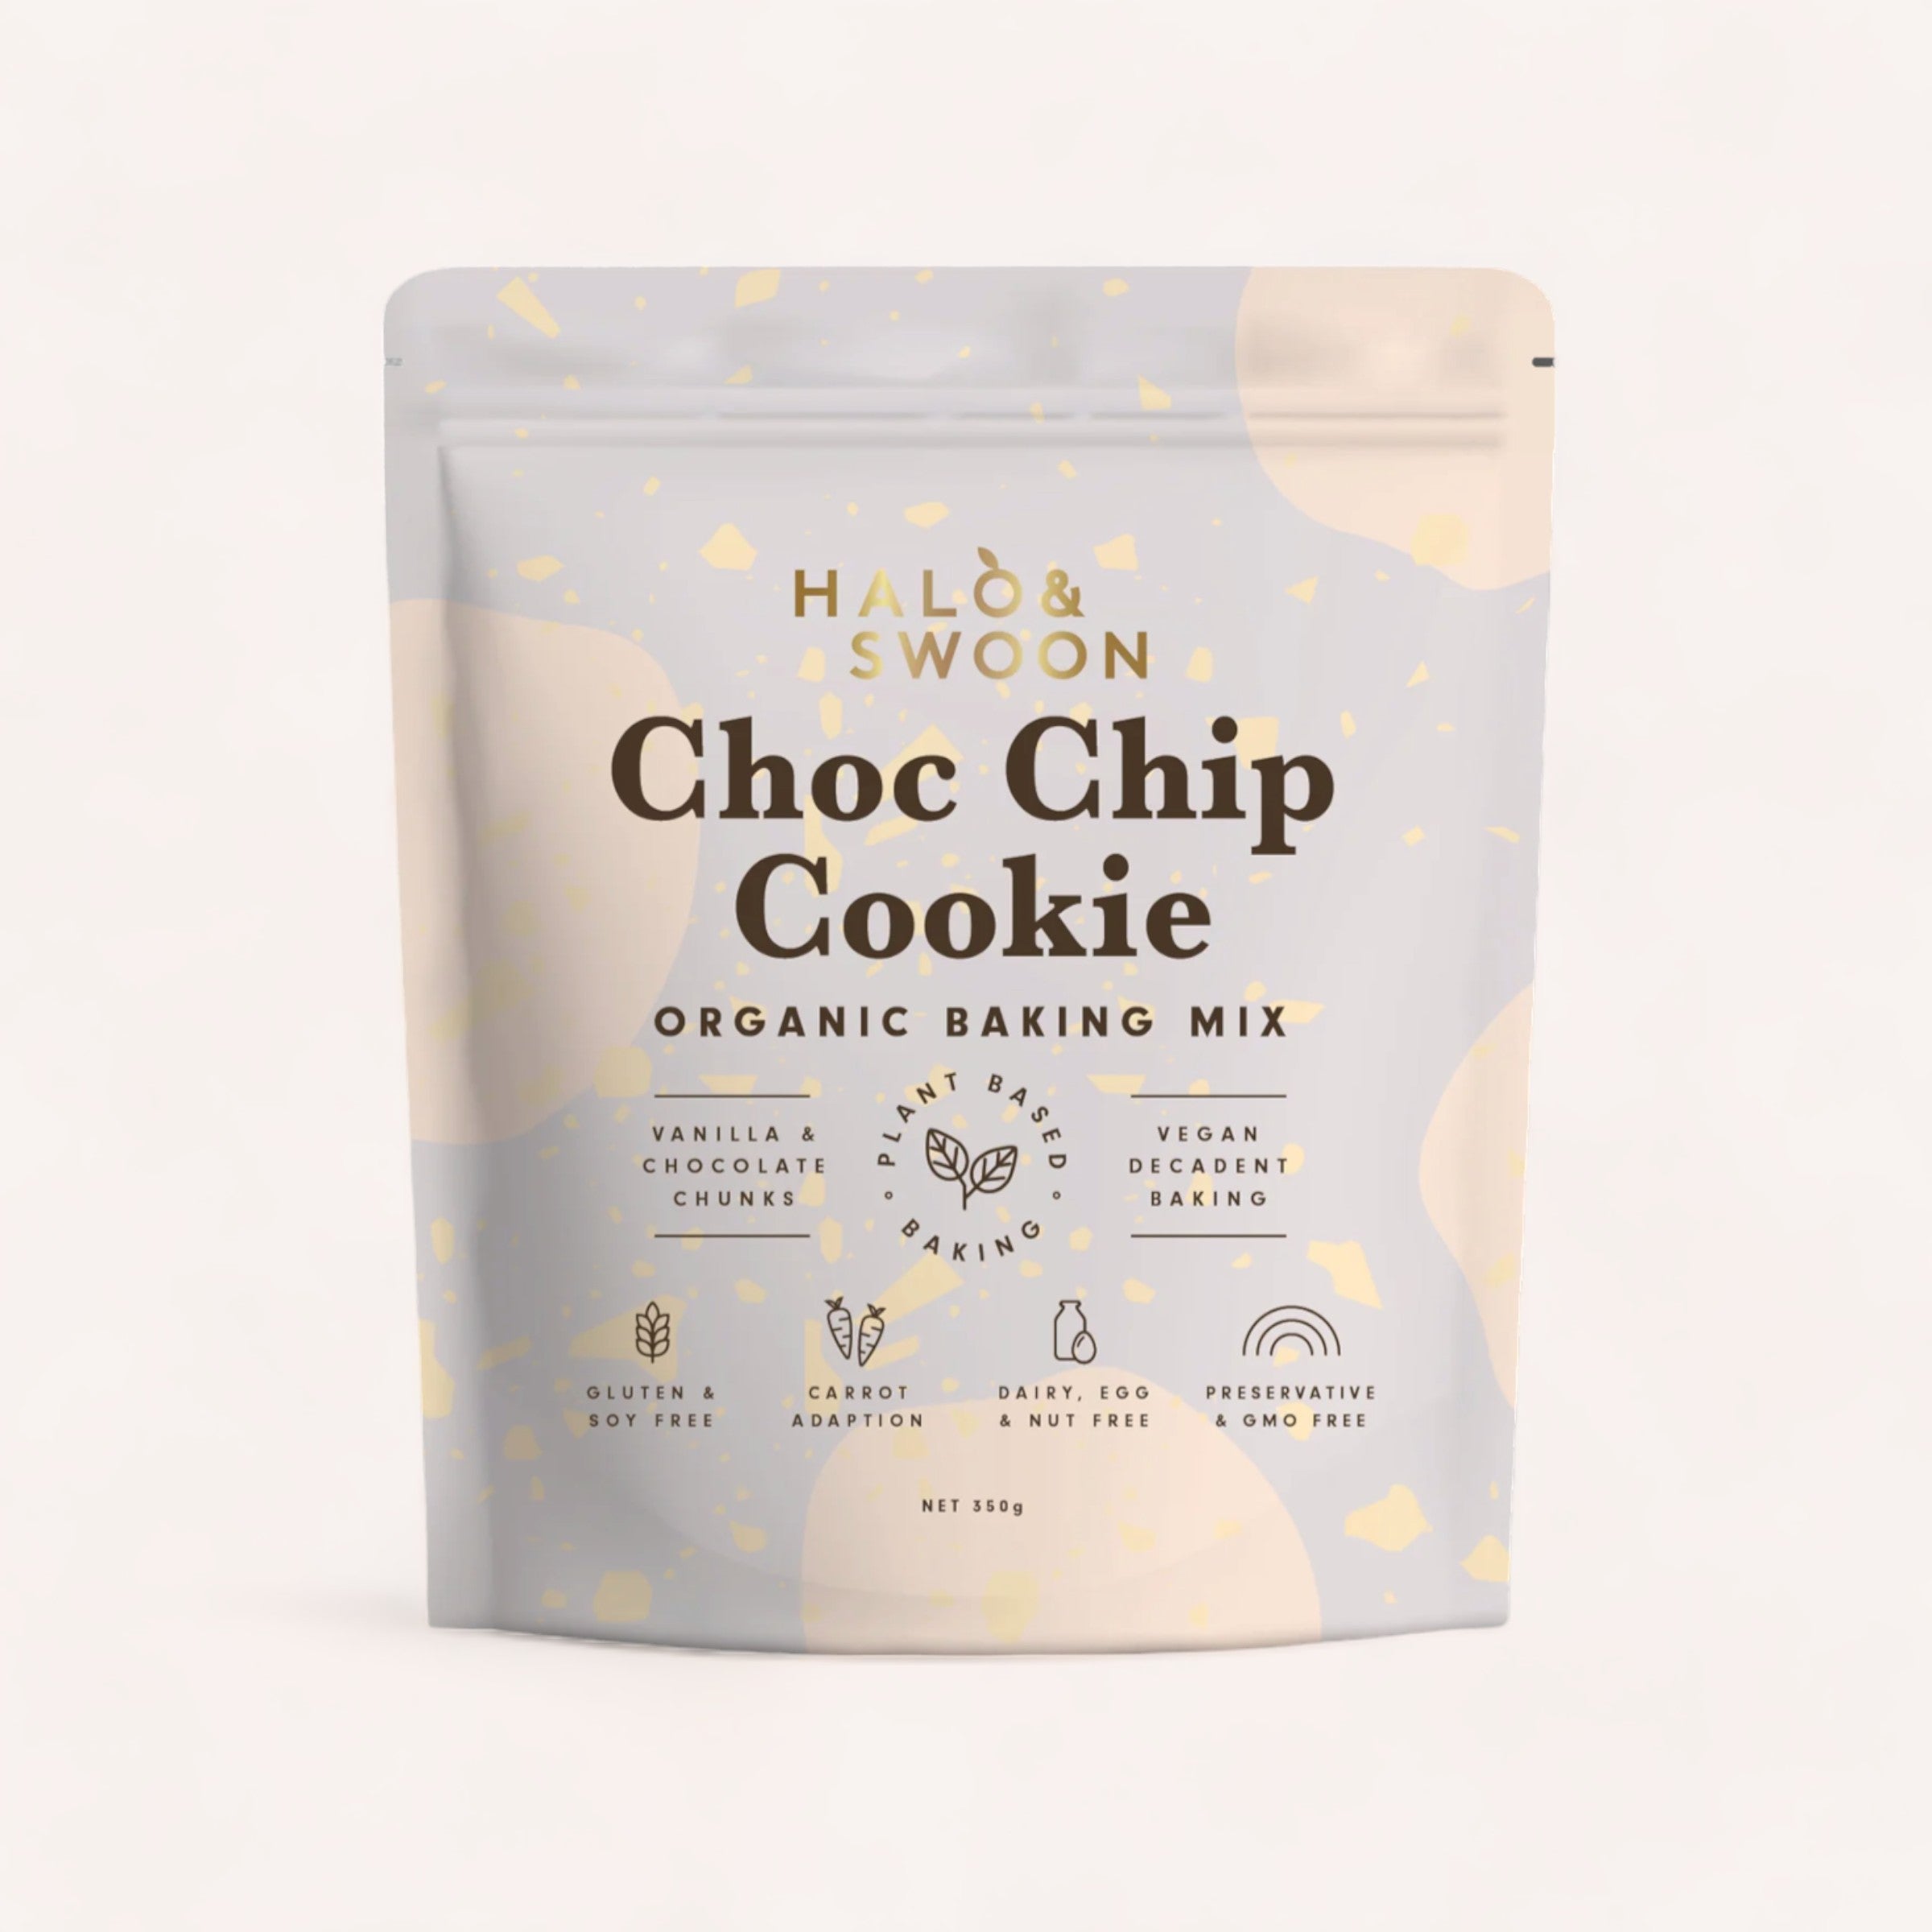 A package of allergy-friendly Choc Chip Cookie Mix by Halo & Swoon for vegan chocolate chip cookies, featuring vegan chocolate chunks and a gluten-free recipe, against a neutral background.